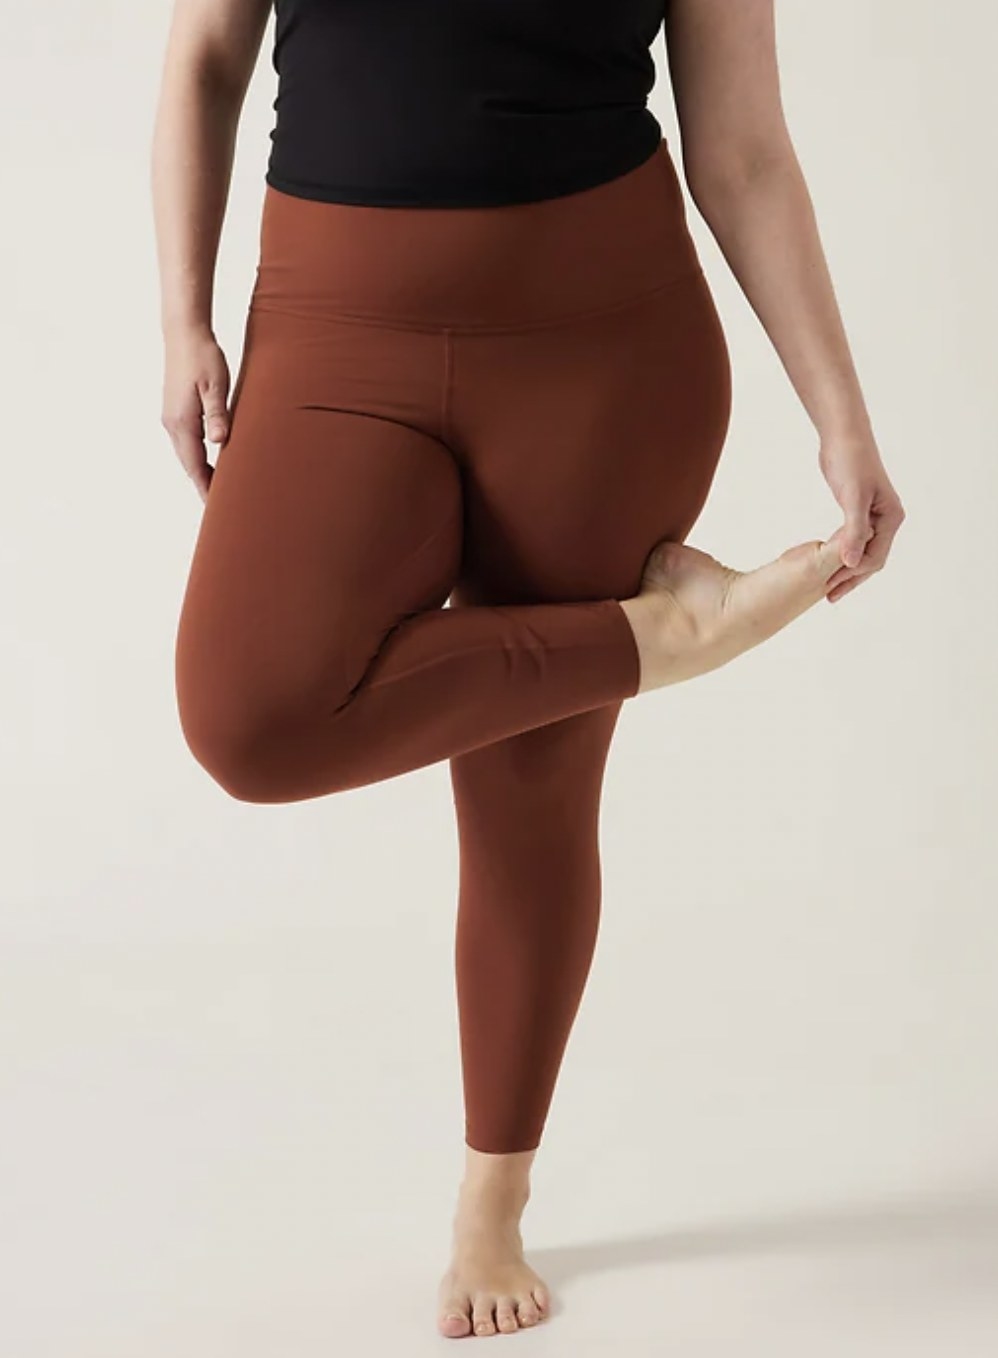 Model stretching glute in standing pigeon in copper tights